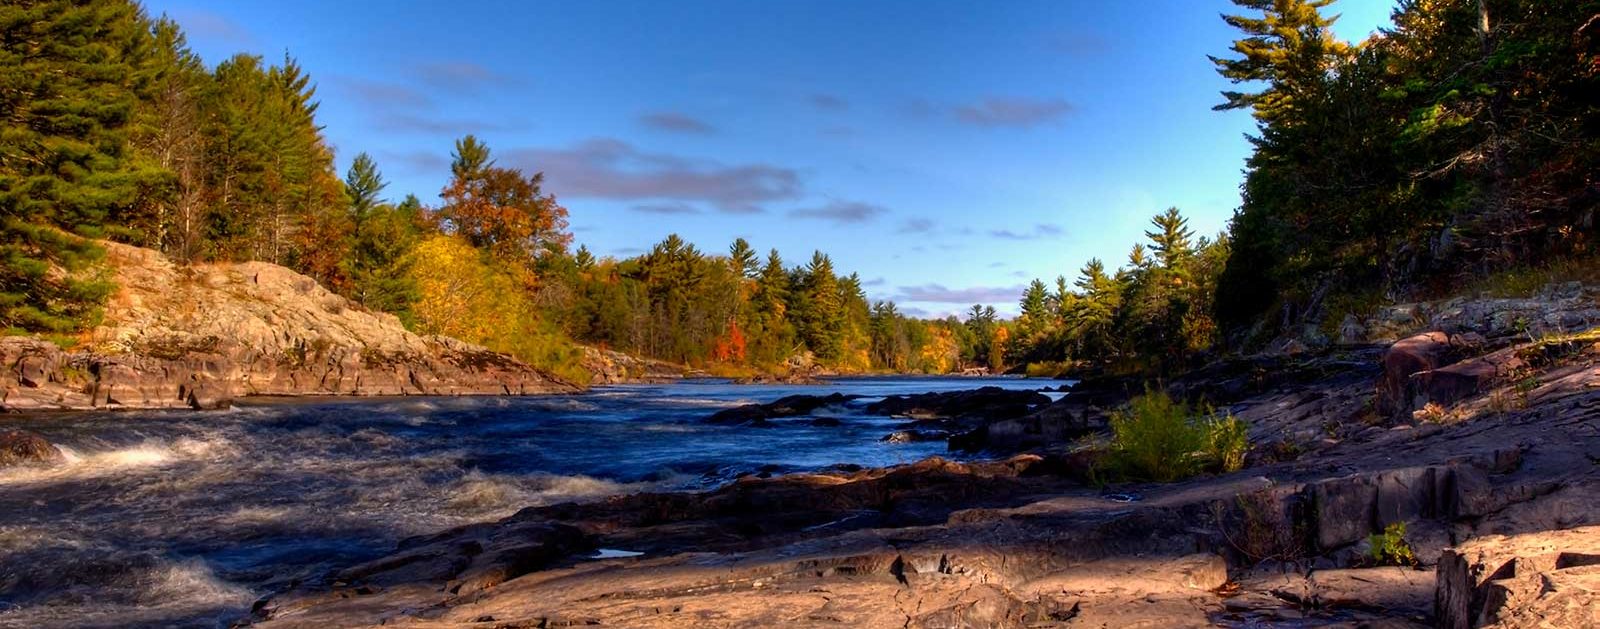 Menominee River | Tom Young